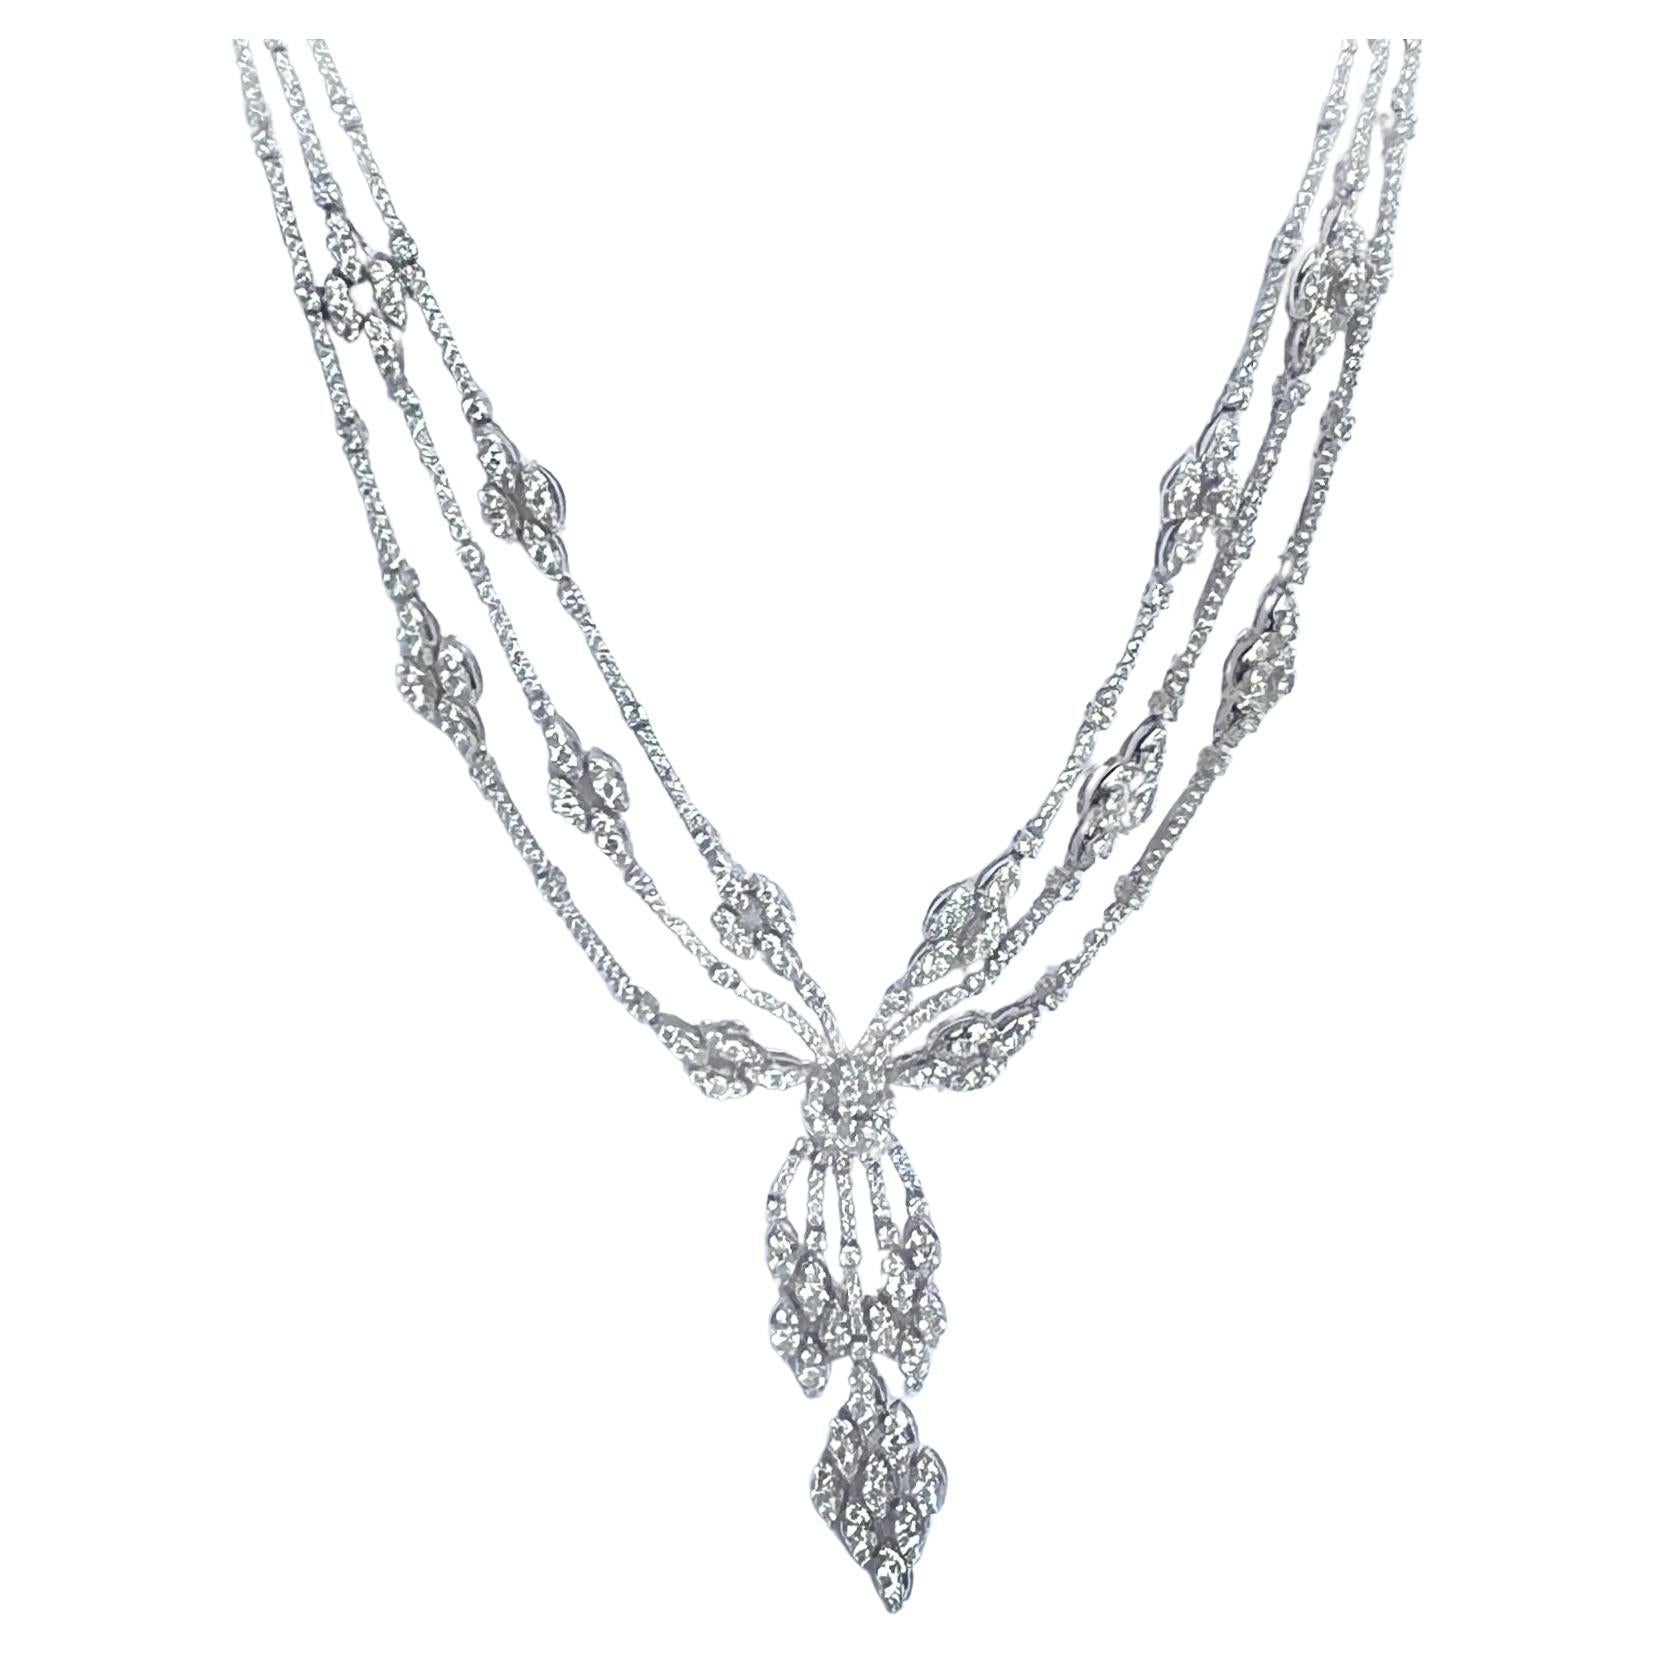 Modern 18 Carat White Gold and Diamond Encrusted Pendant Necklace